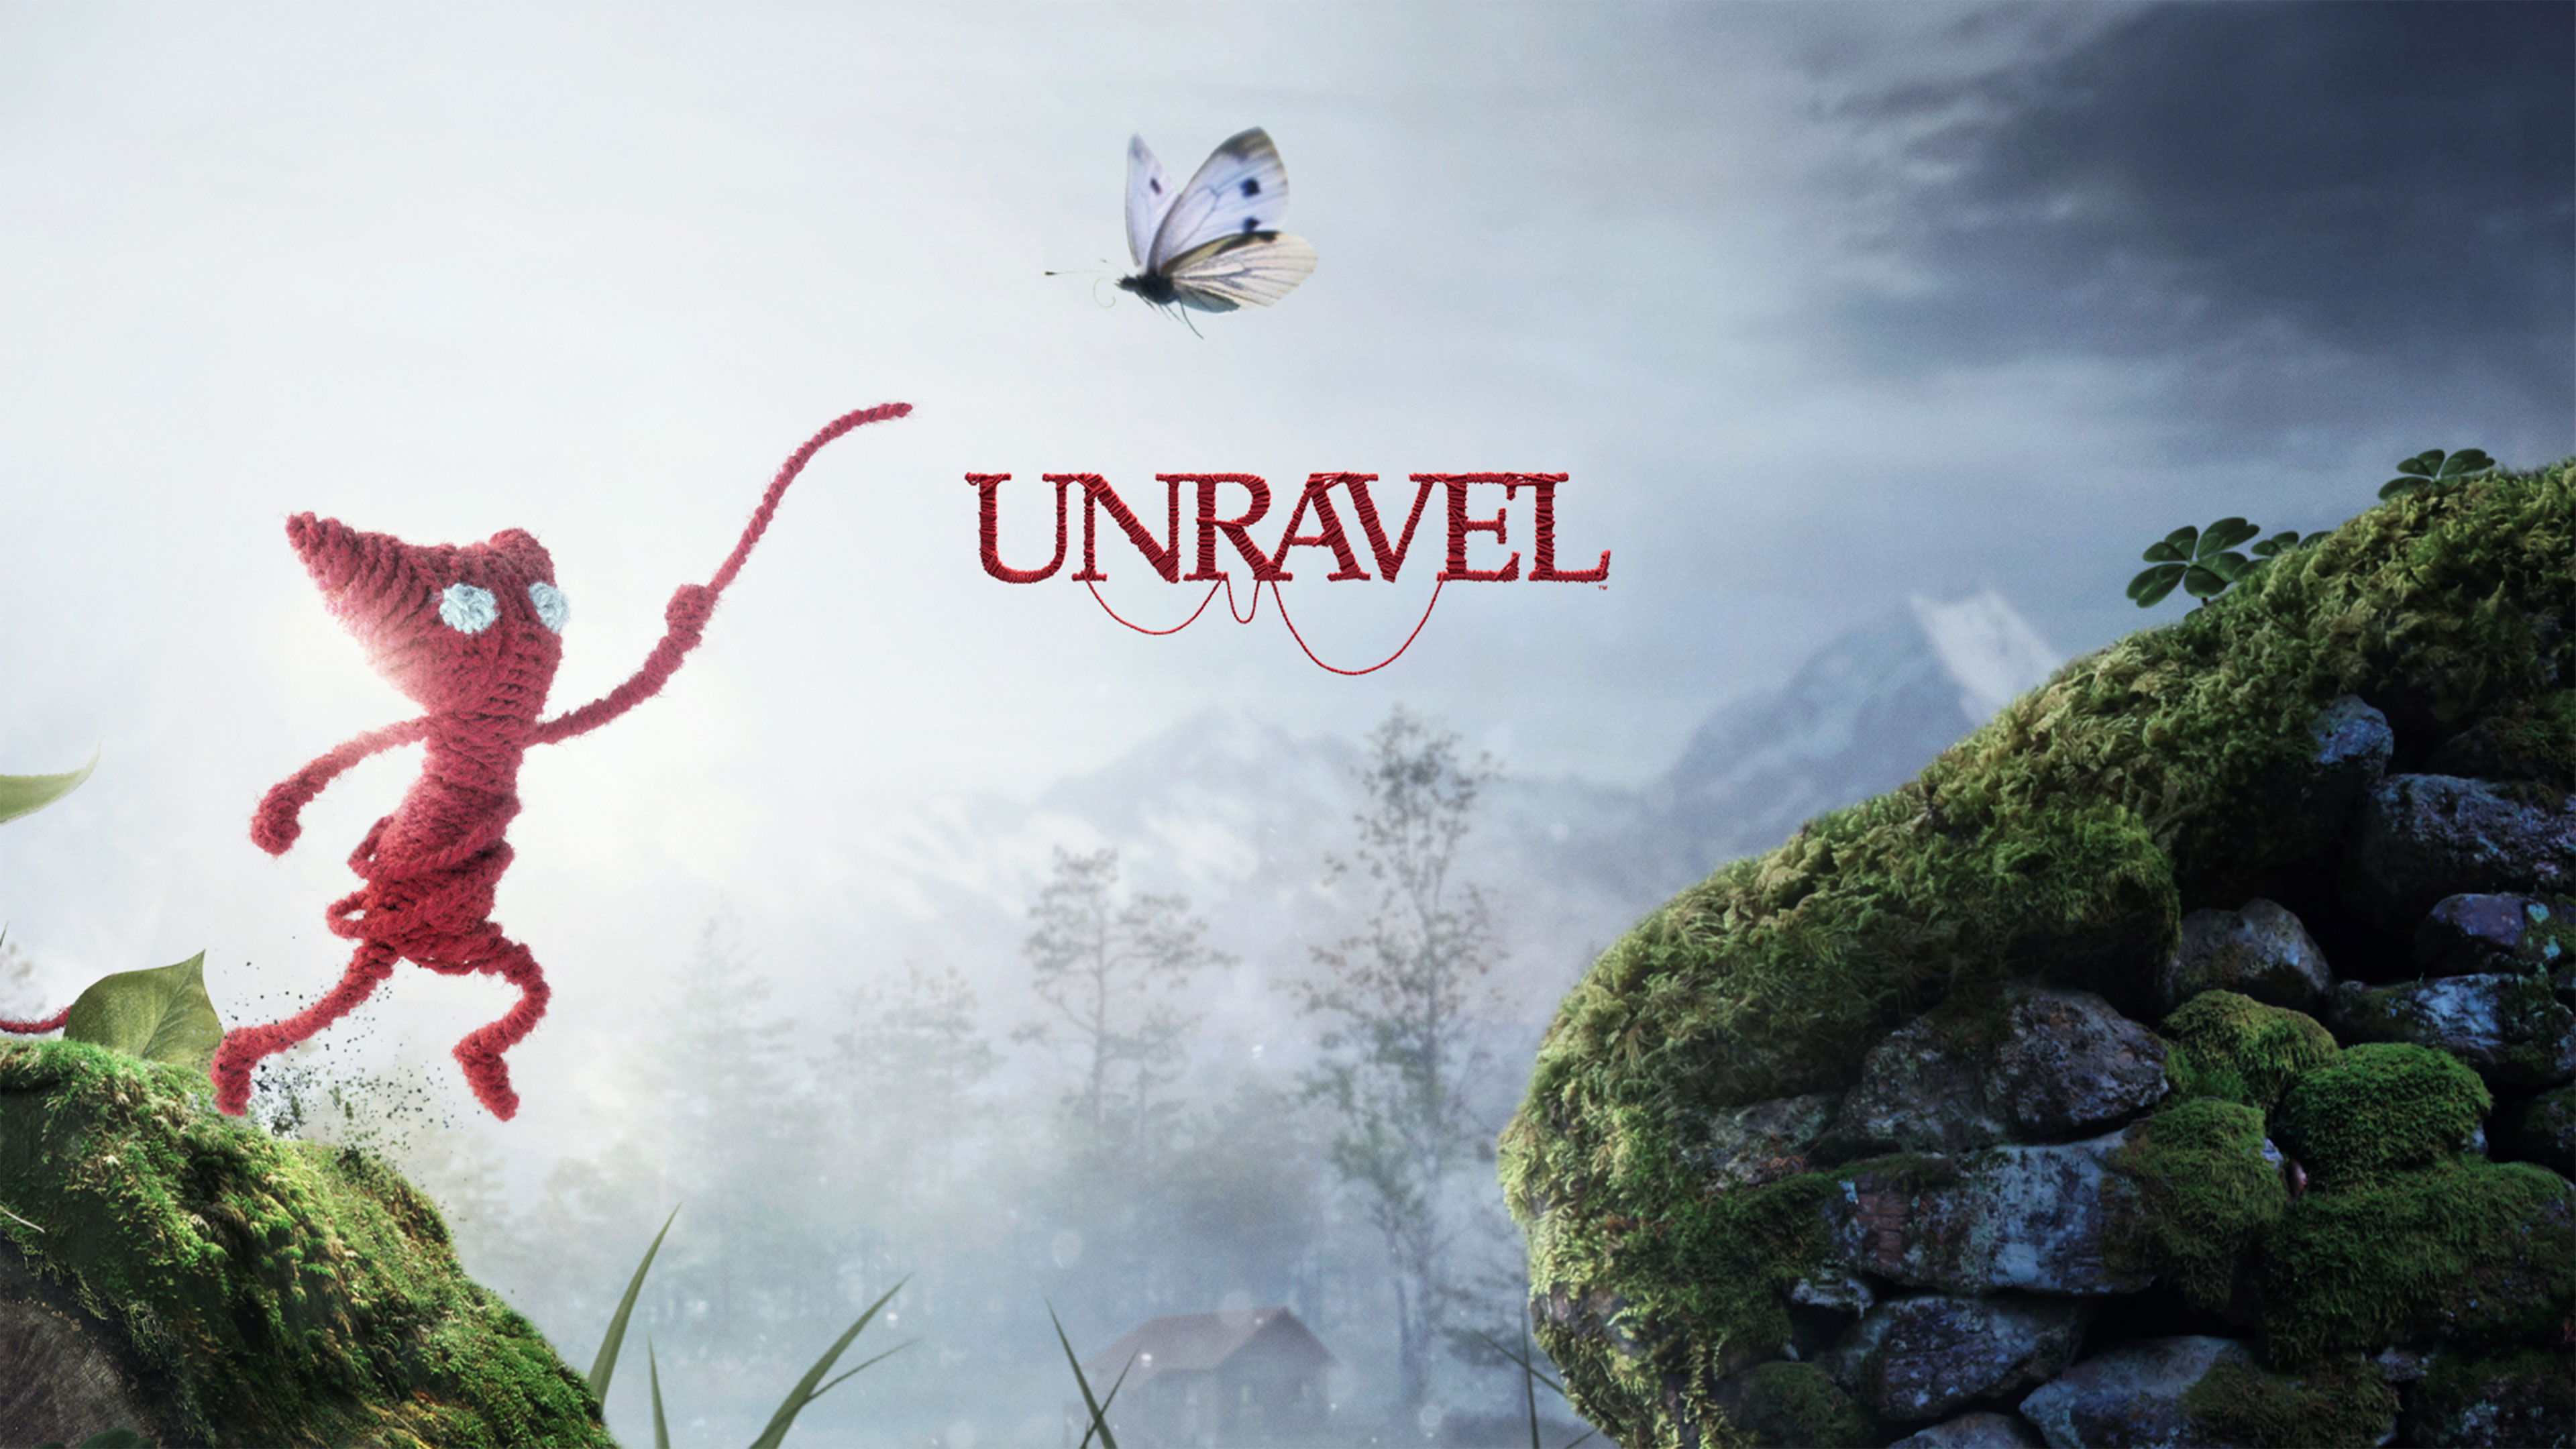 Unravel Game Wallpaper HD